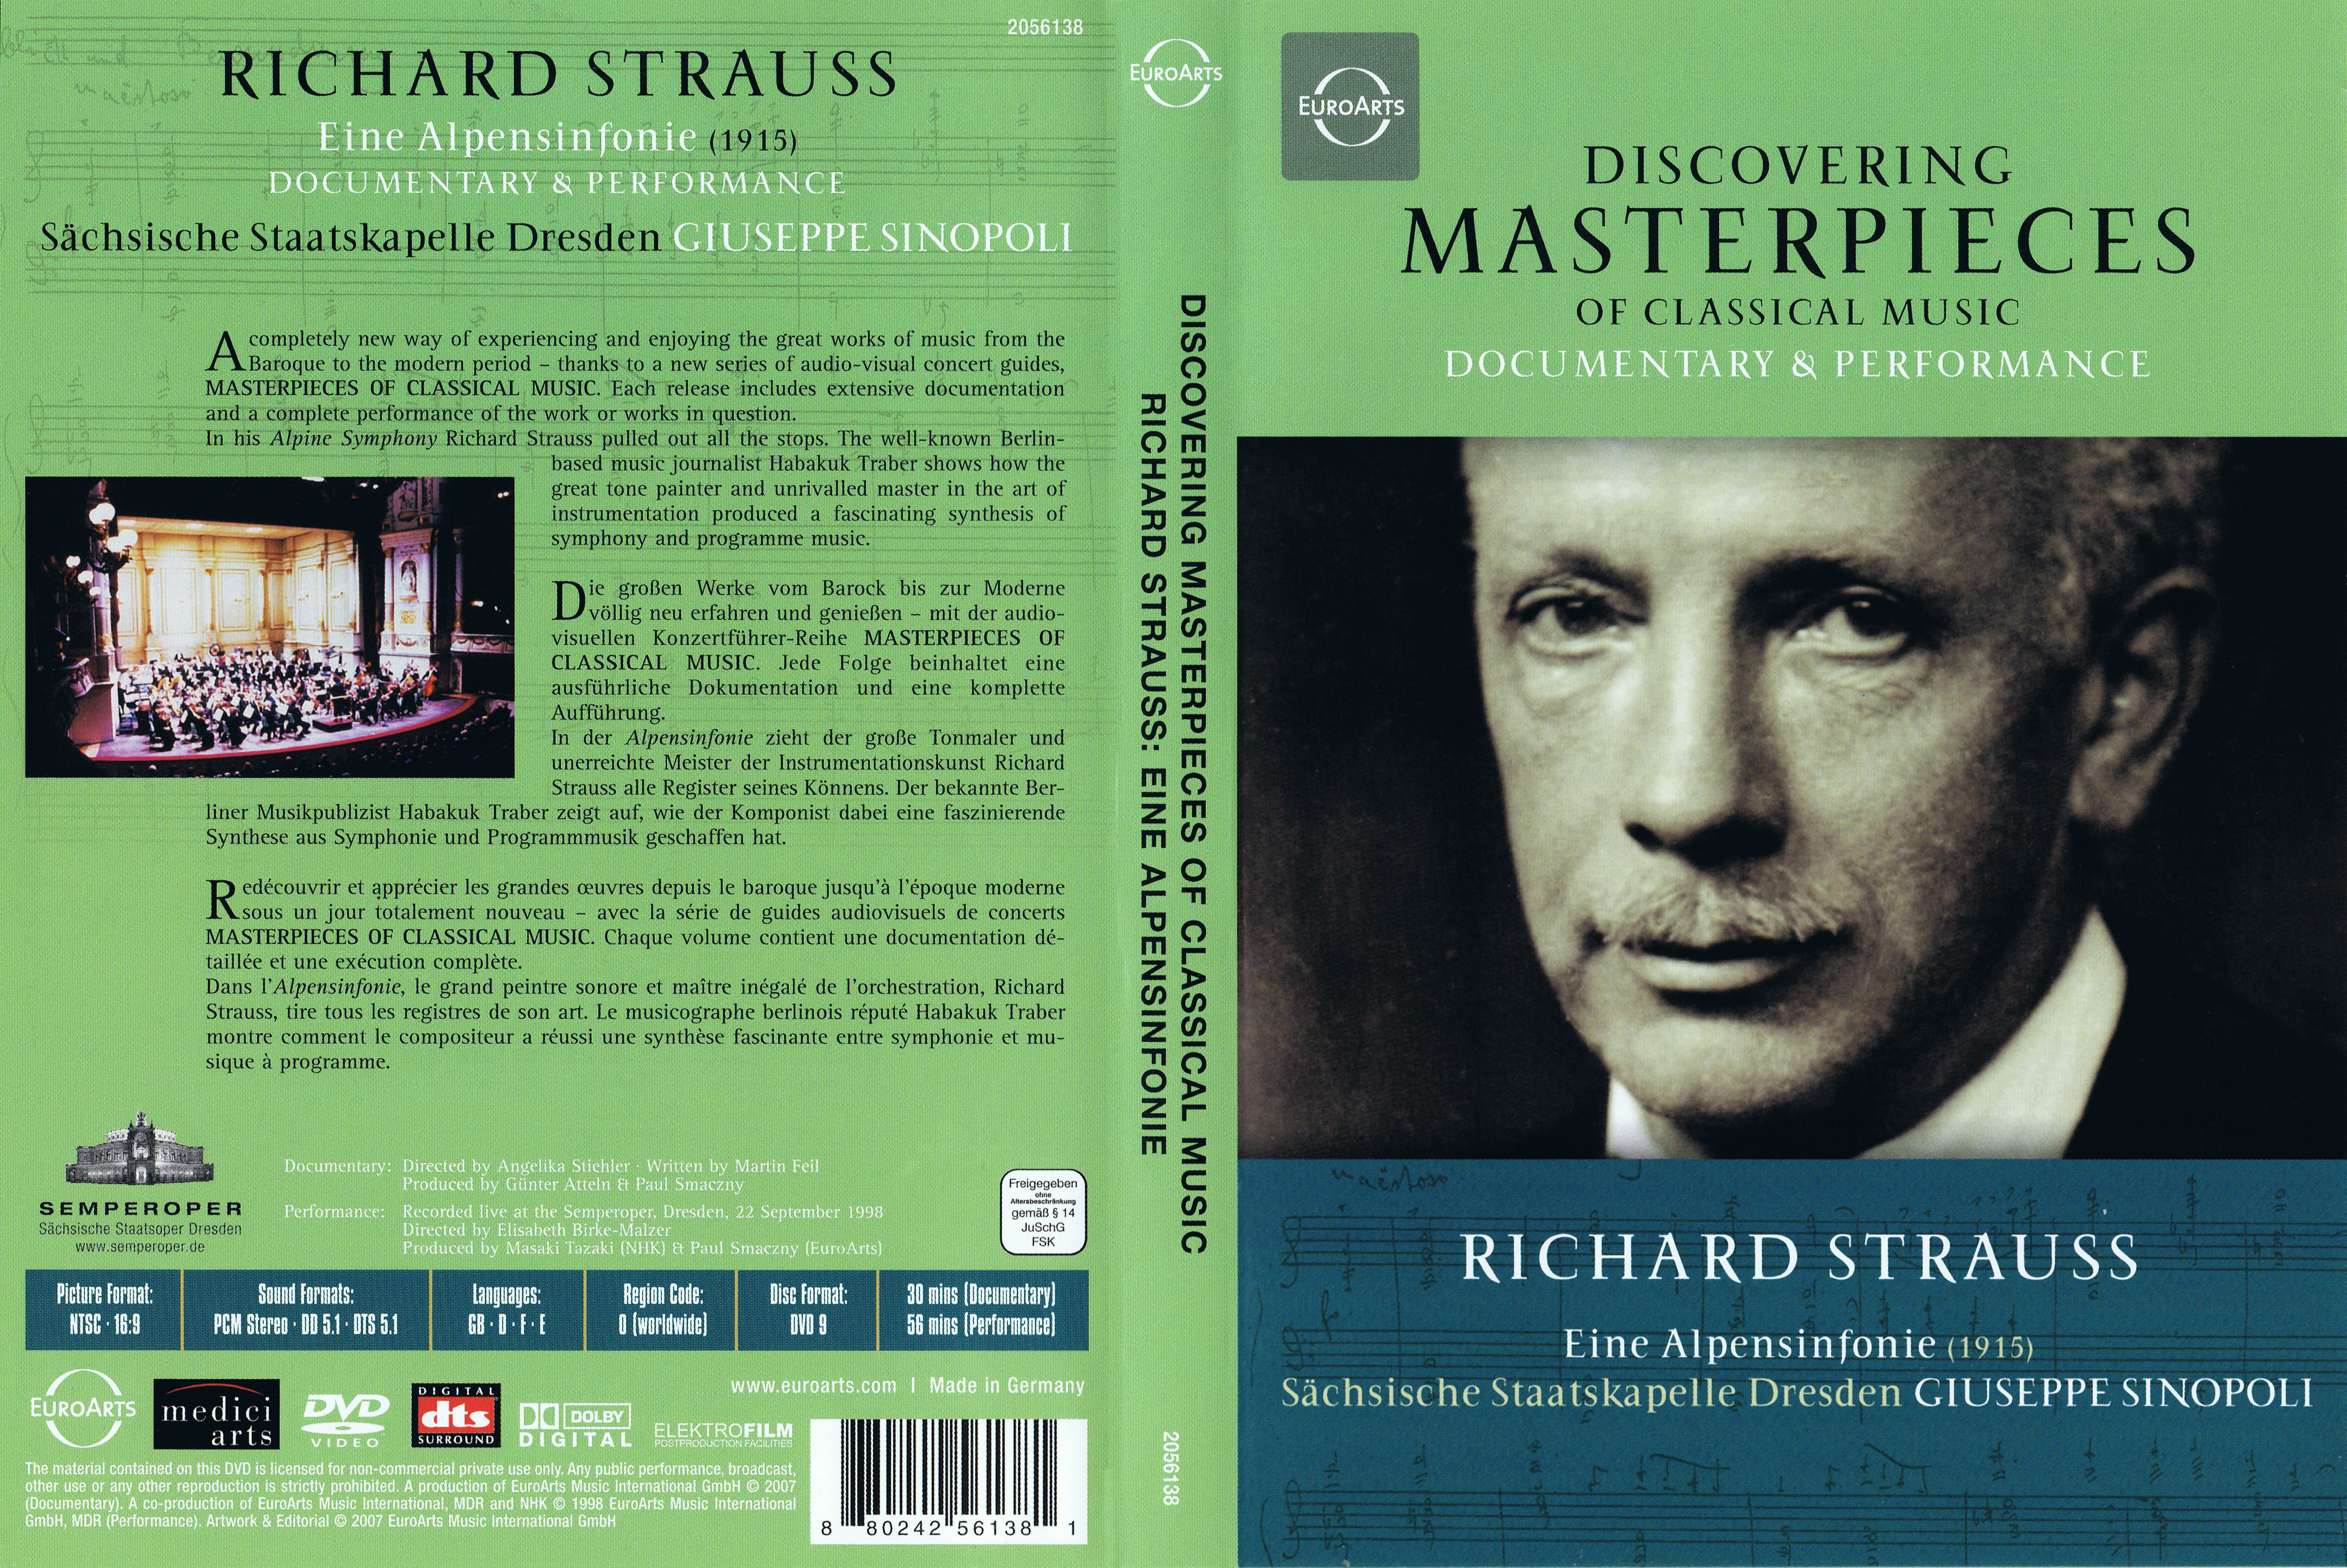 Jaquette DVD Discovering masterpieces - Richard Strauss